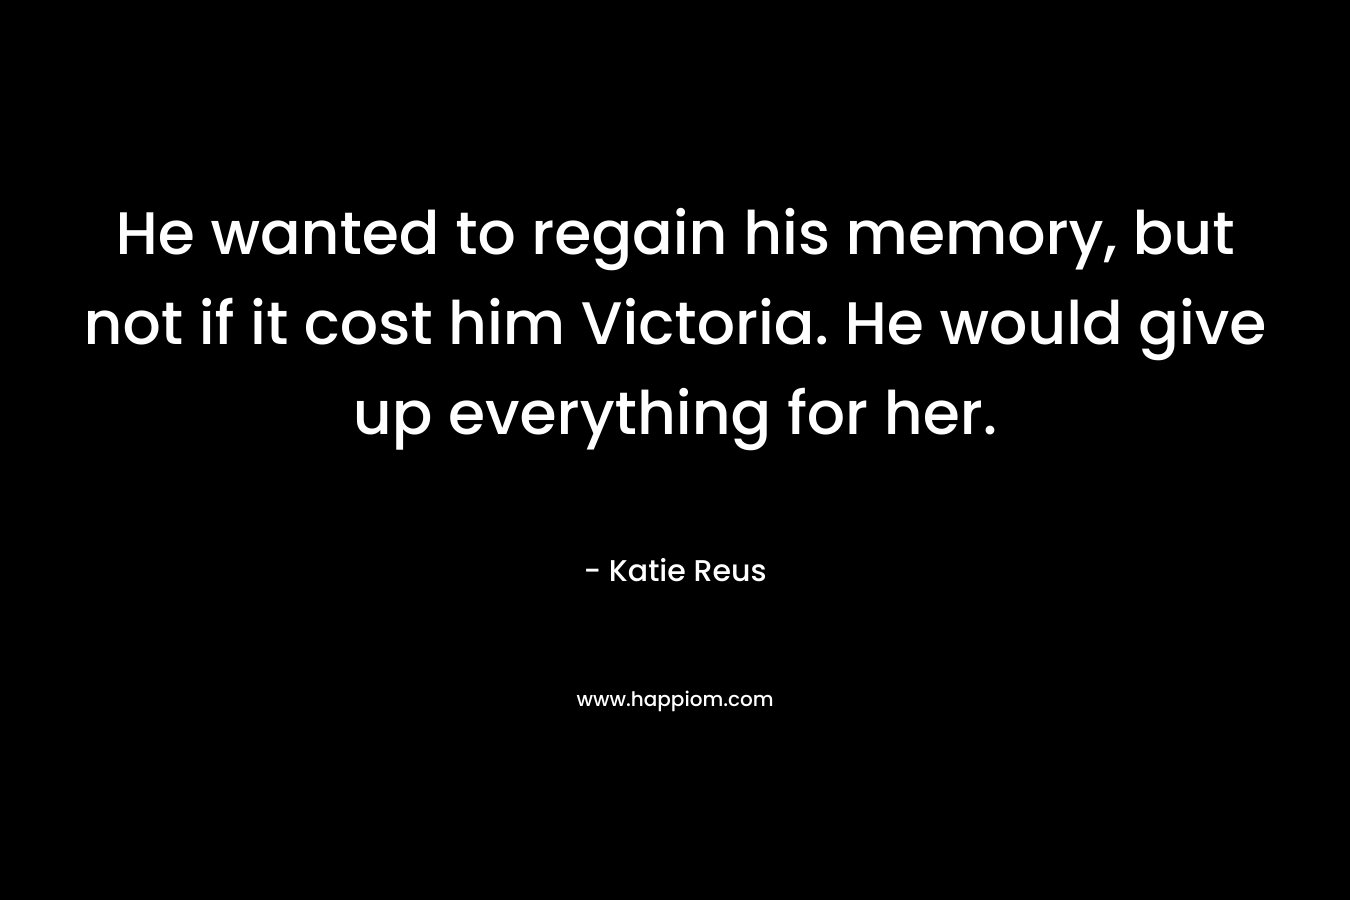 He wanted to regain his memory, but not if it cost him Victoria. He would give up everything for her.